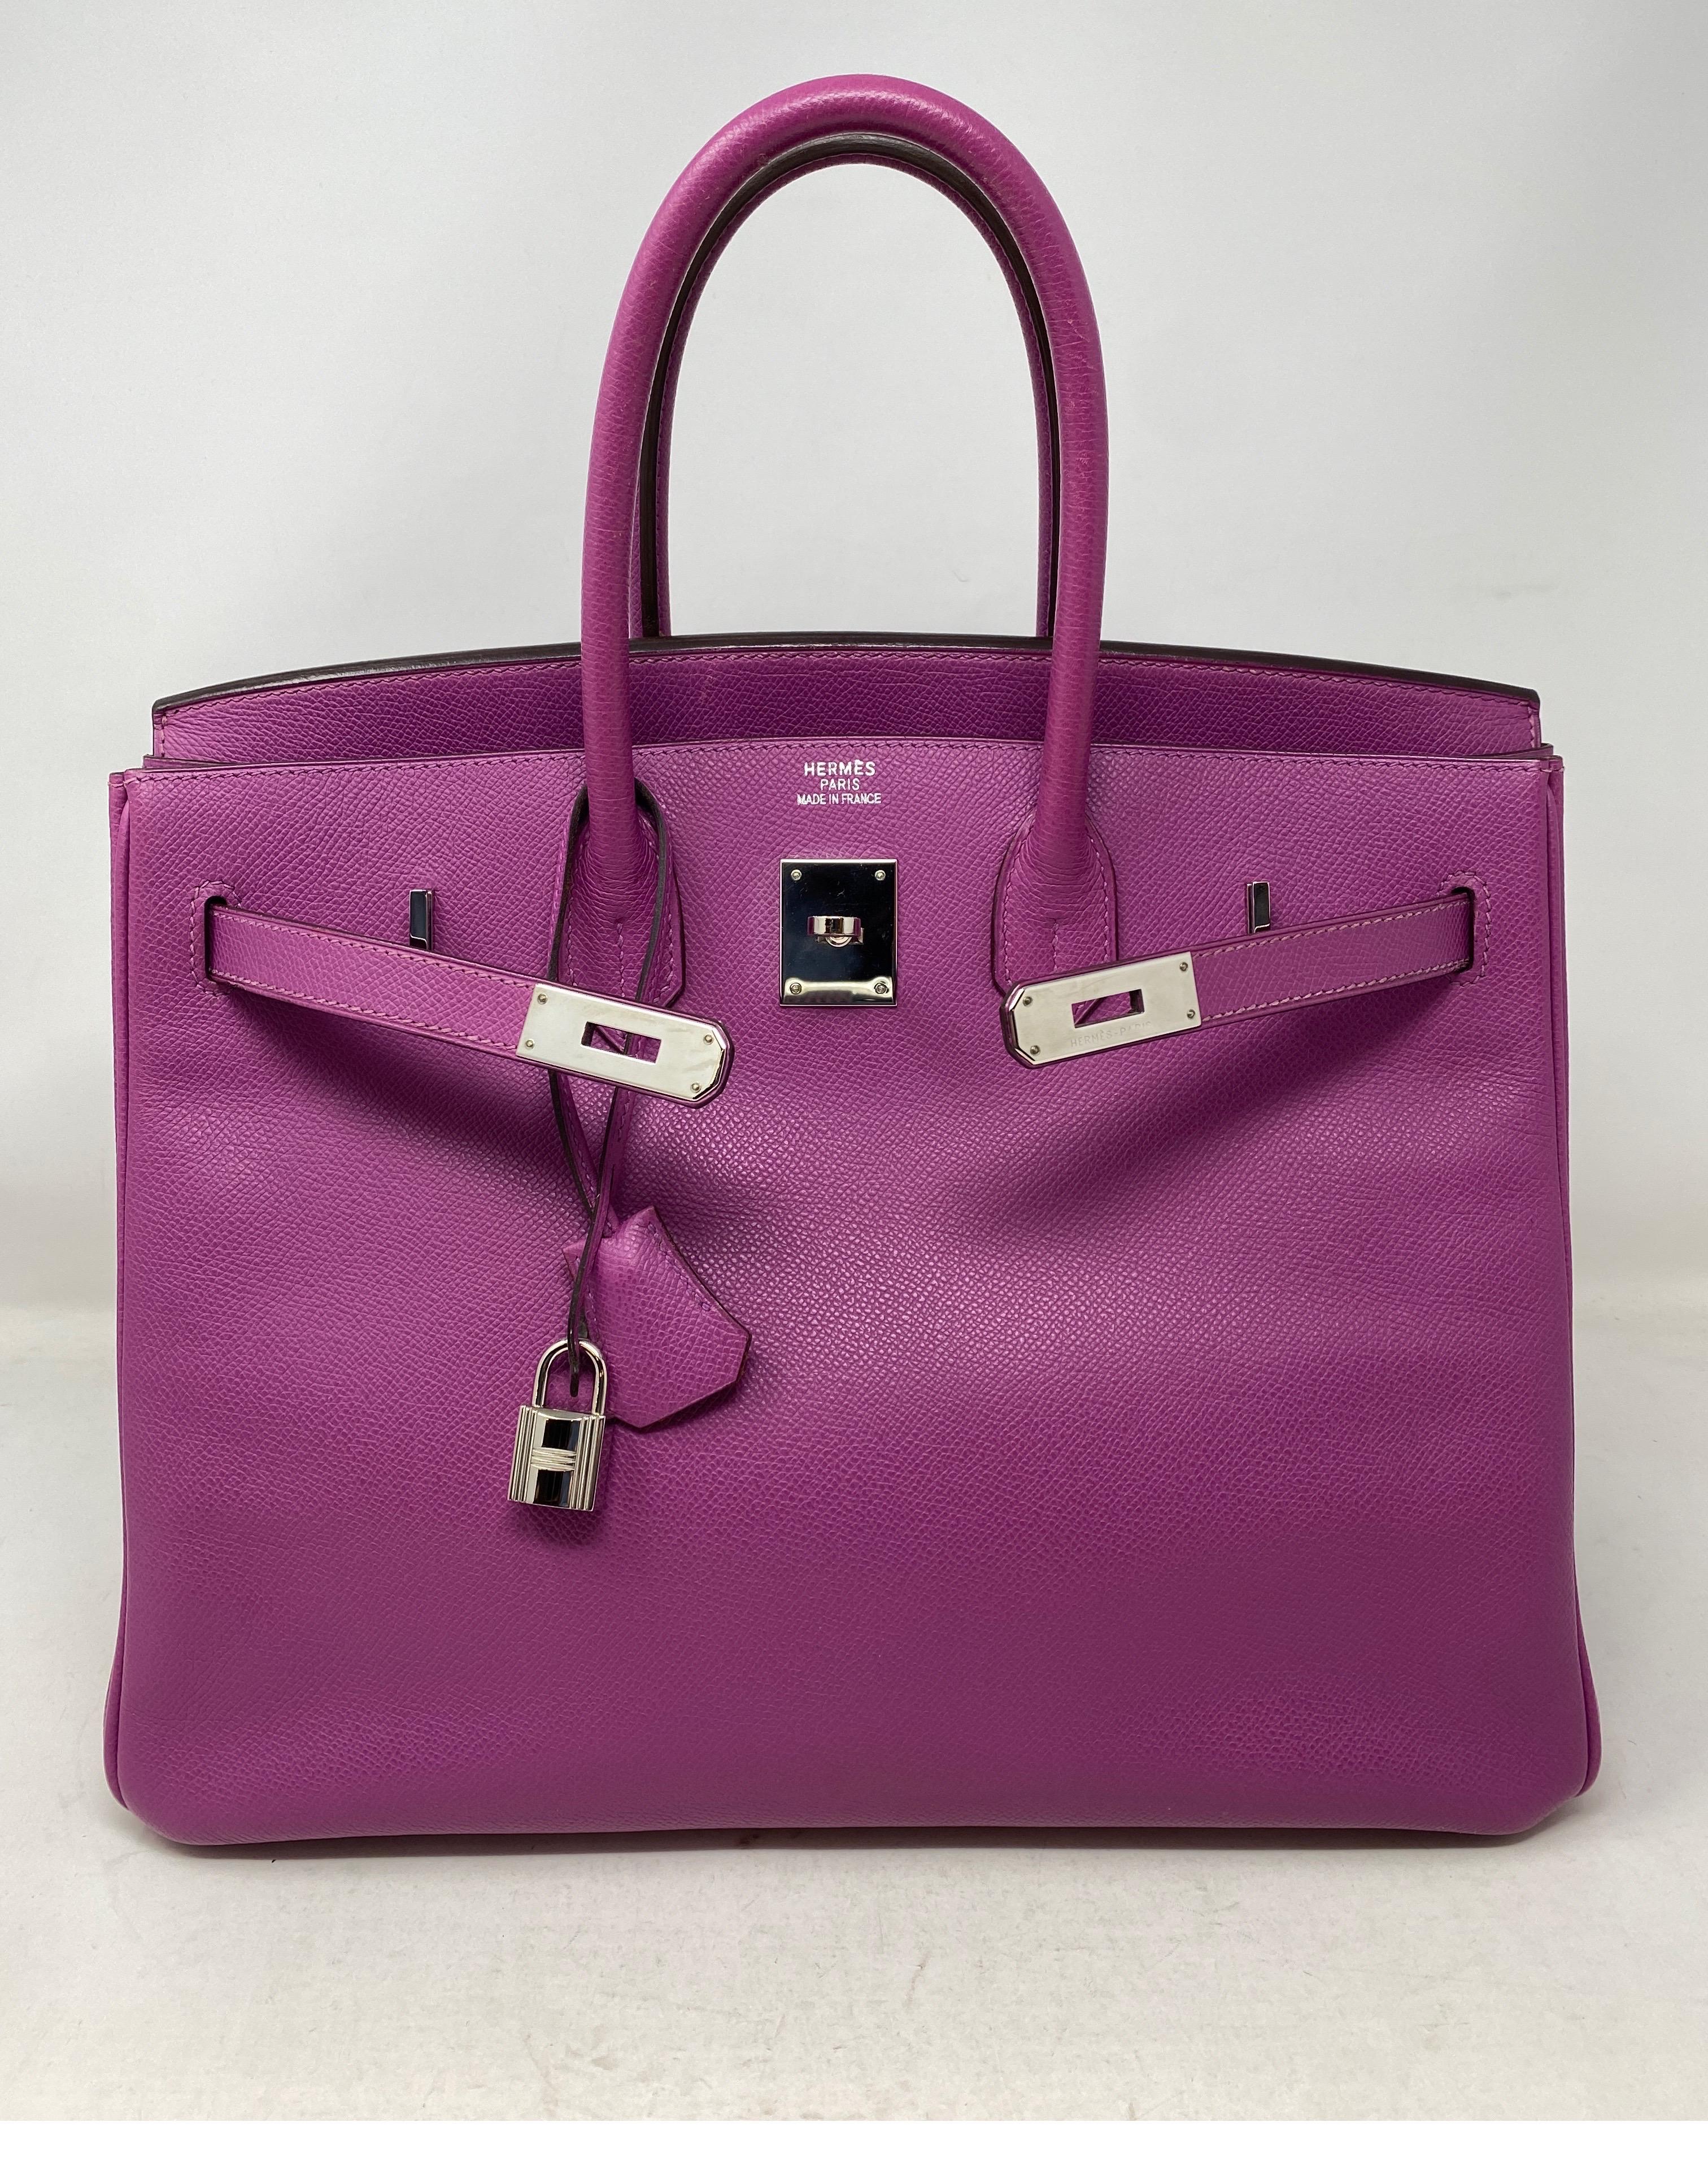 Hermes Birkin 35 Cyclamen Rare Bag. Palladium hardware. Excellent condition. Epsom leather. Includes clochette, lock, keys, and dust cover. Guaranteed authentic. Comes with orange dust cover. 